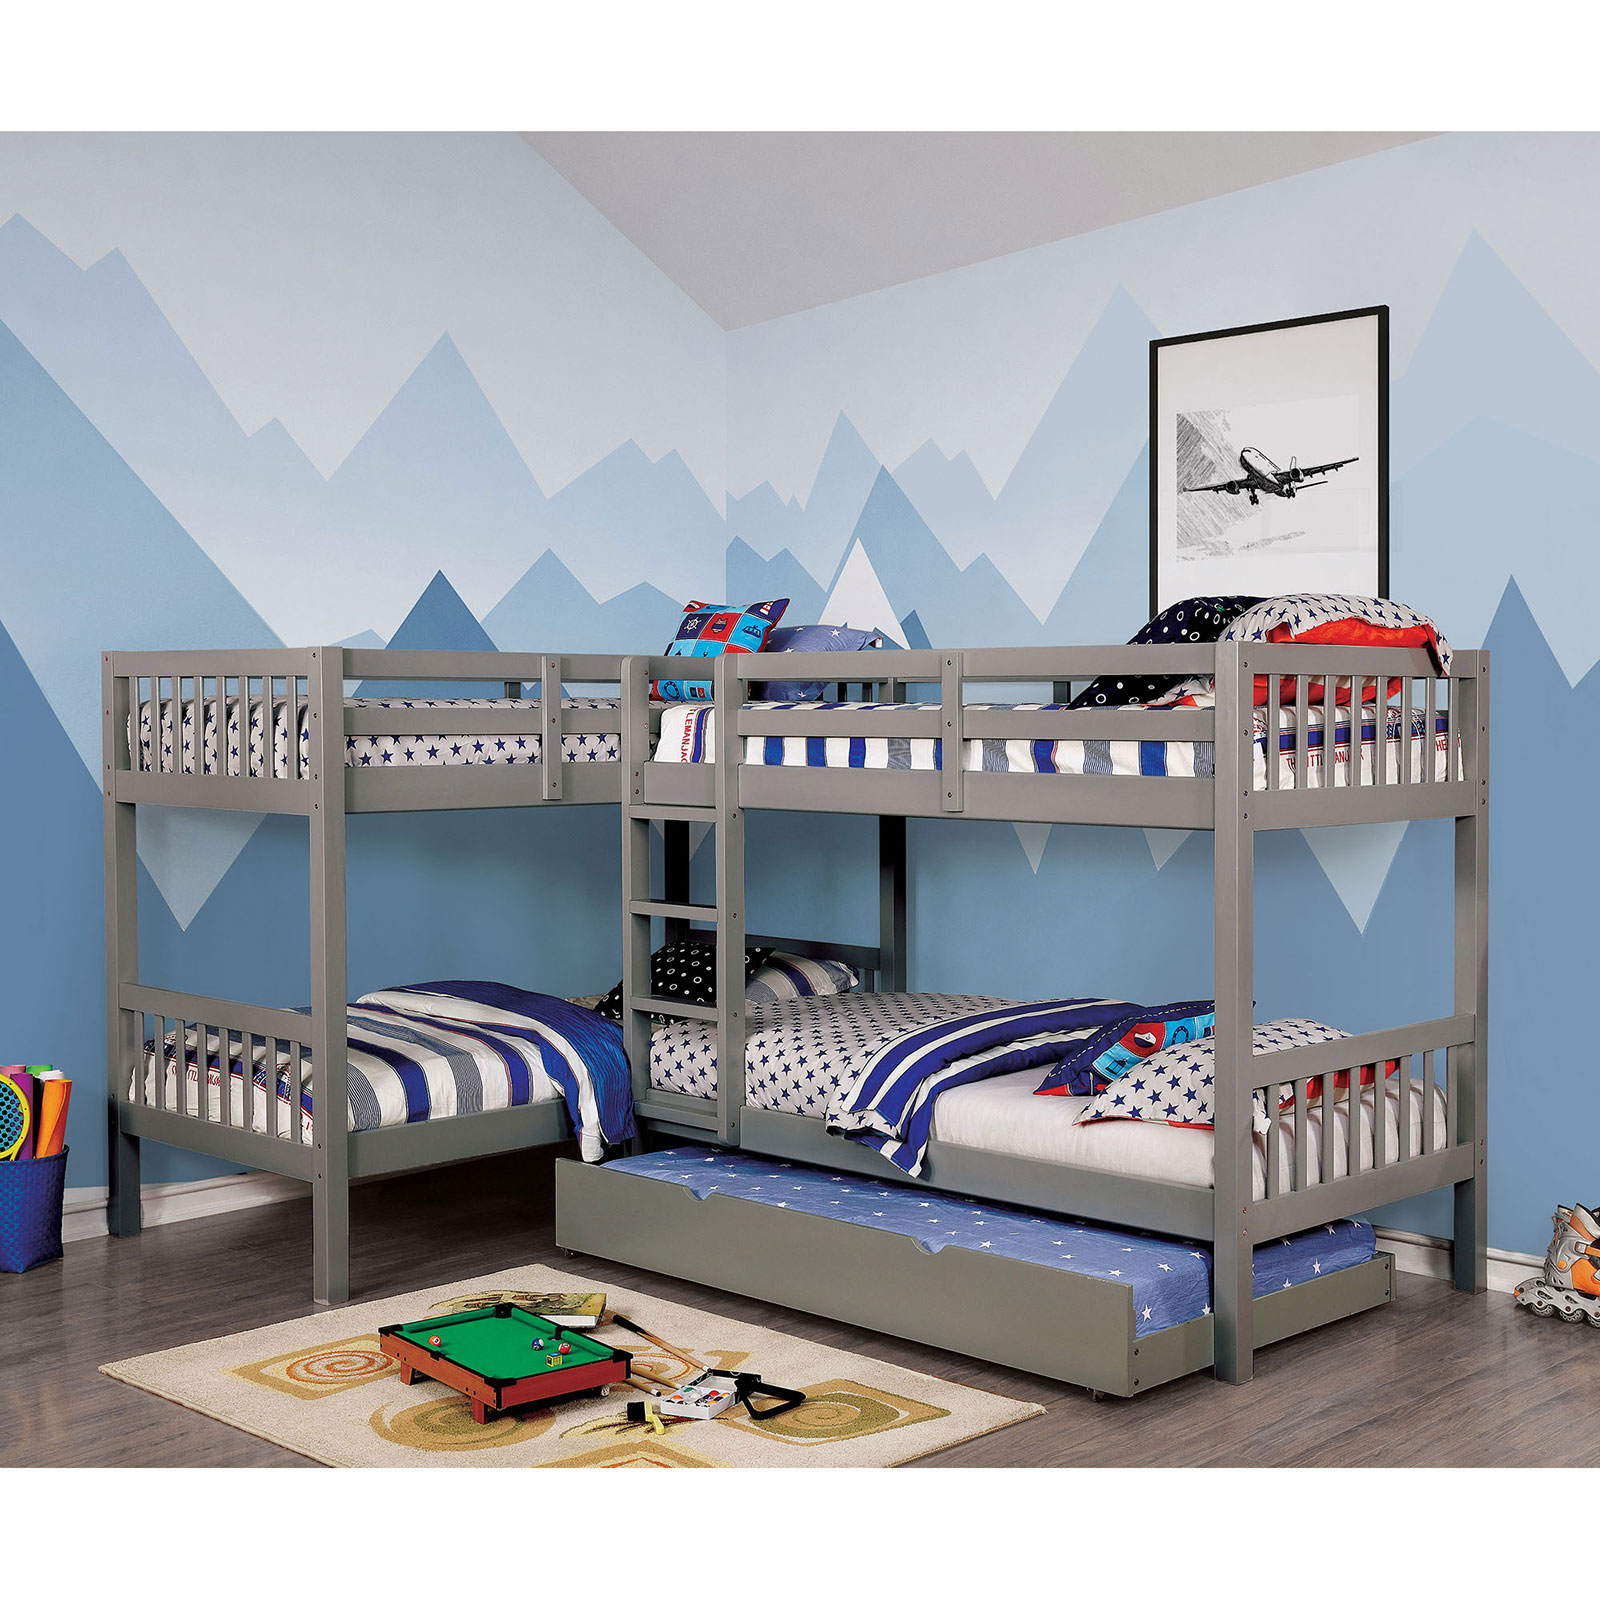 Esofa Transitional Modern Youth, Maddox Twin Over Double Bunk Bed